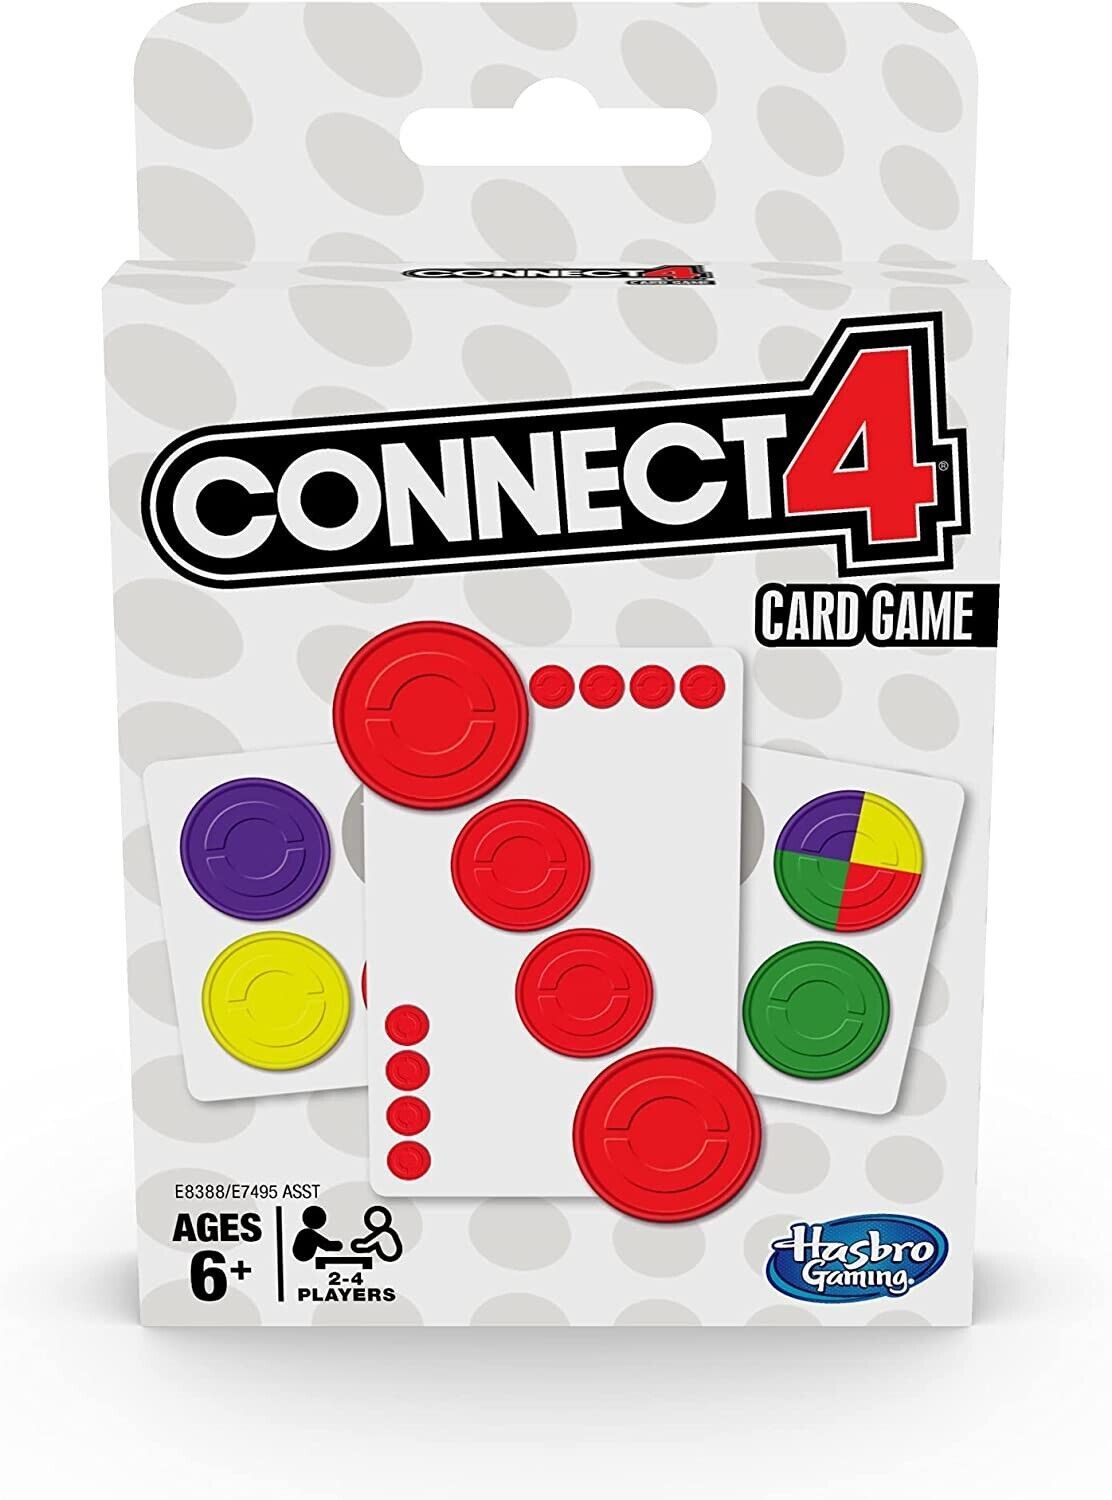 Primary image for Hasbro Gaming Connect 4 Card Game for Kids Ages 6 and Up, 2-4 Players 4-in-A-Row